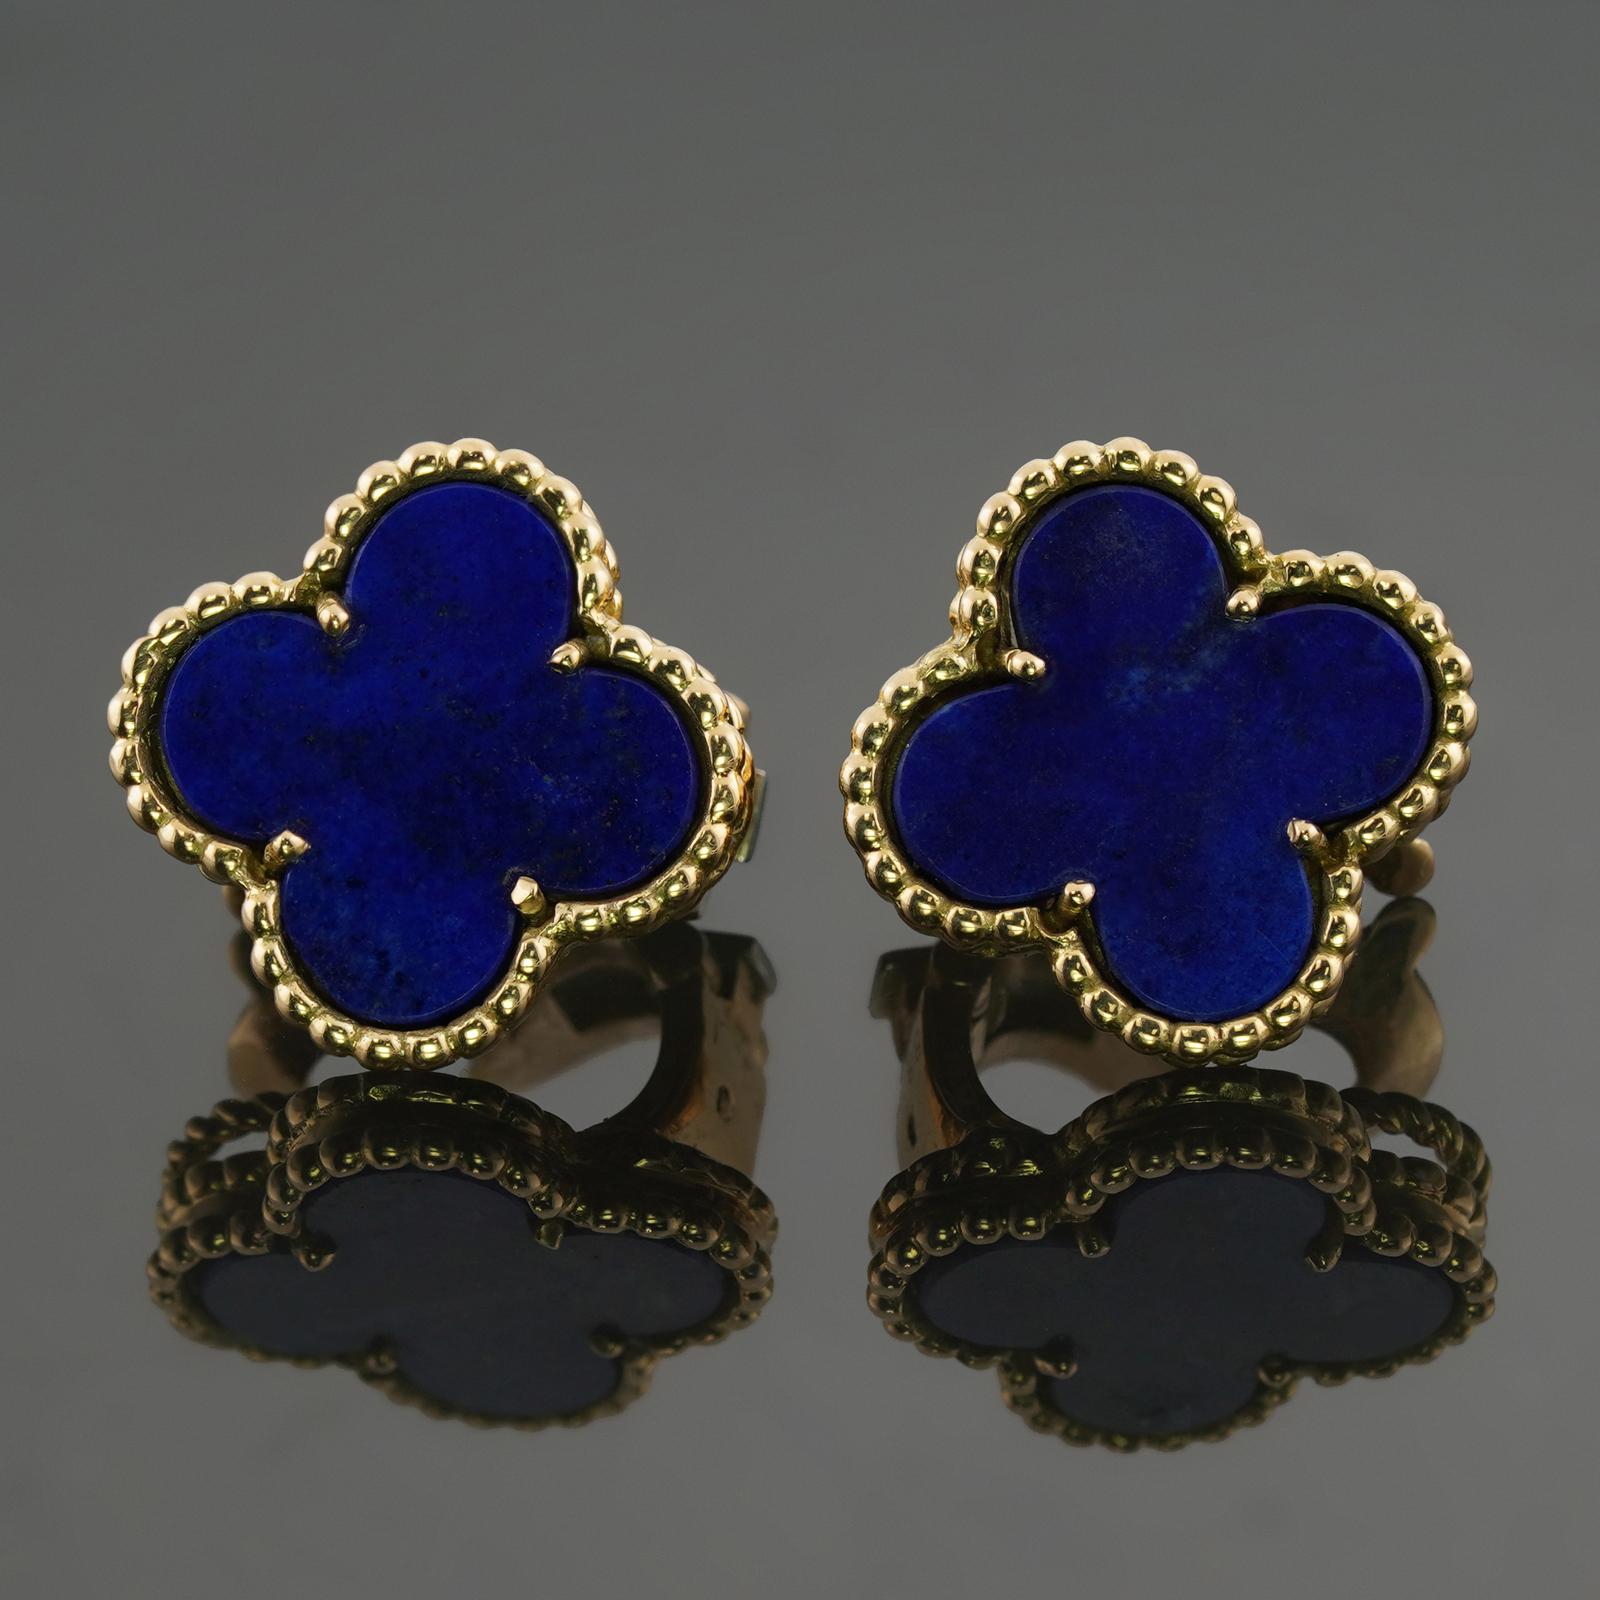 These stunning vintage Van Cleef & Arpels clip-on earrings from the Vintage Alhambra collection feature the lucky clover design crafted in 18k yellow gold and set with blue lapis lazuli gemstones. Made in France circa 1980s. Posts can be added upon